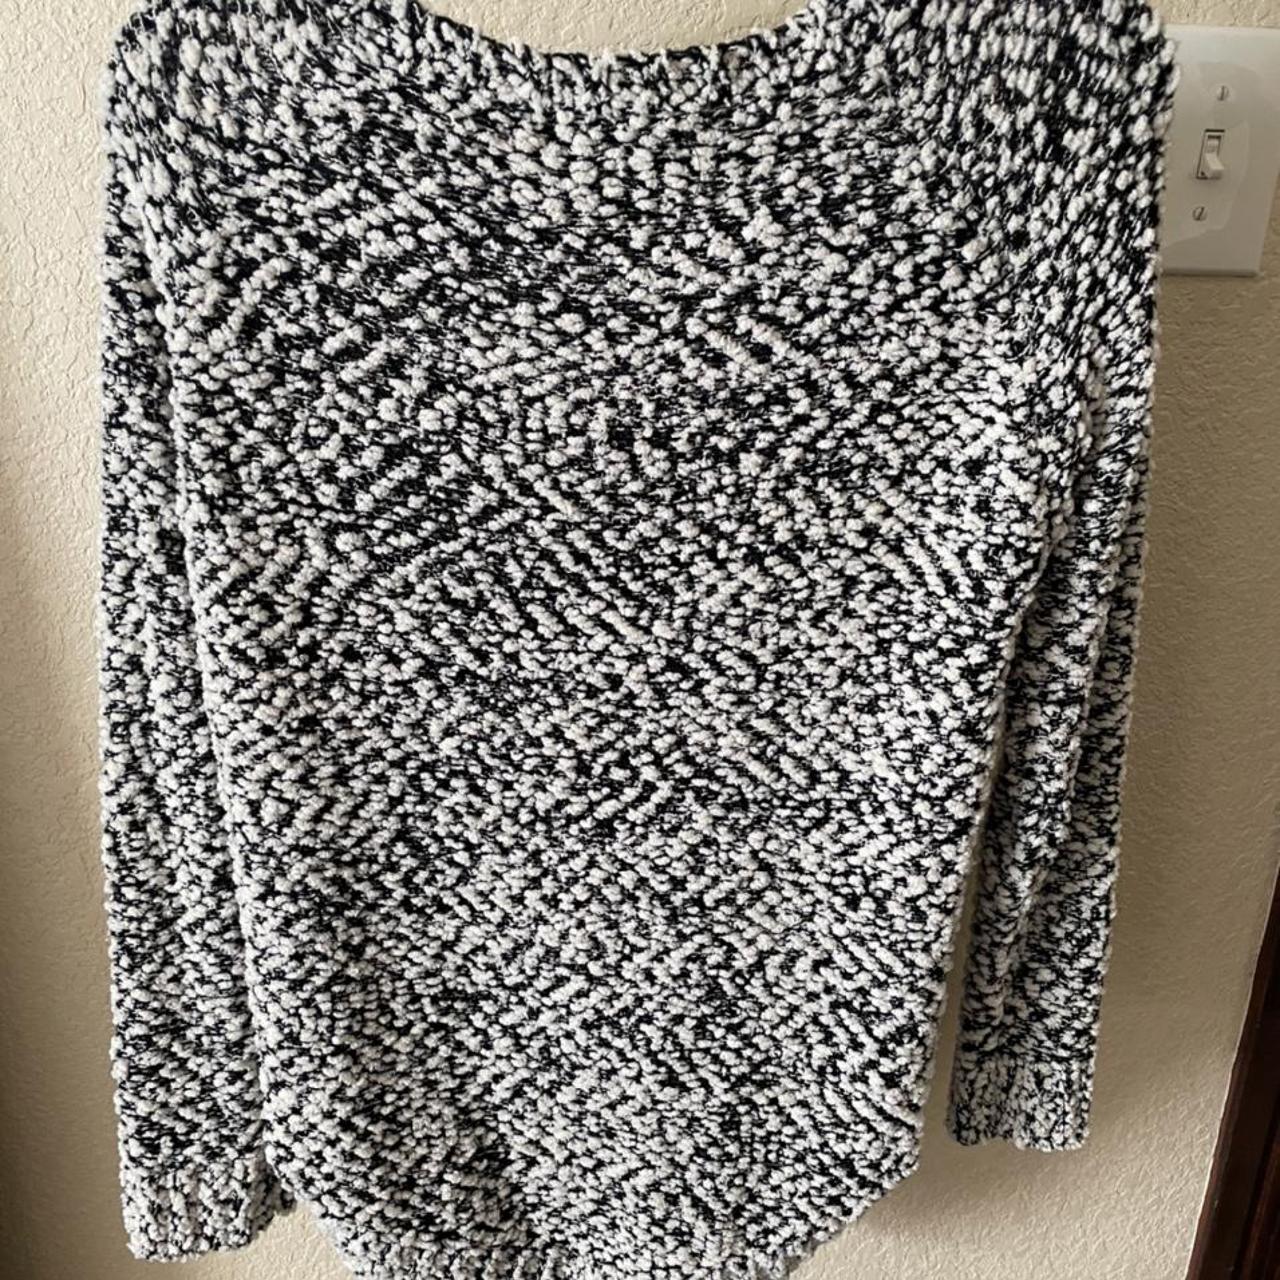 Product Image 2 - Fluffy oversized sweater
Never worn! No